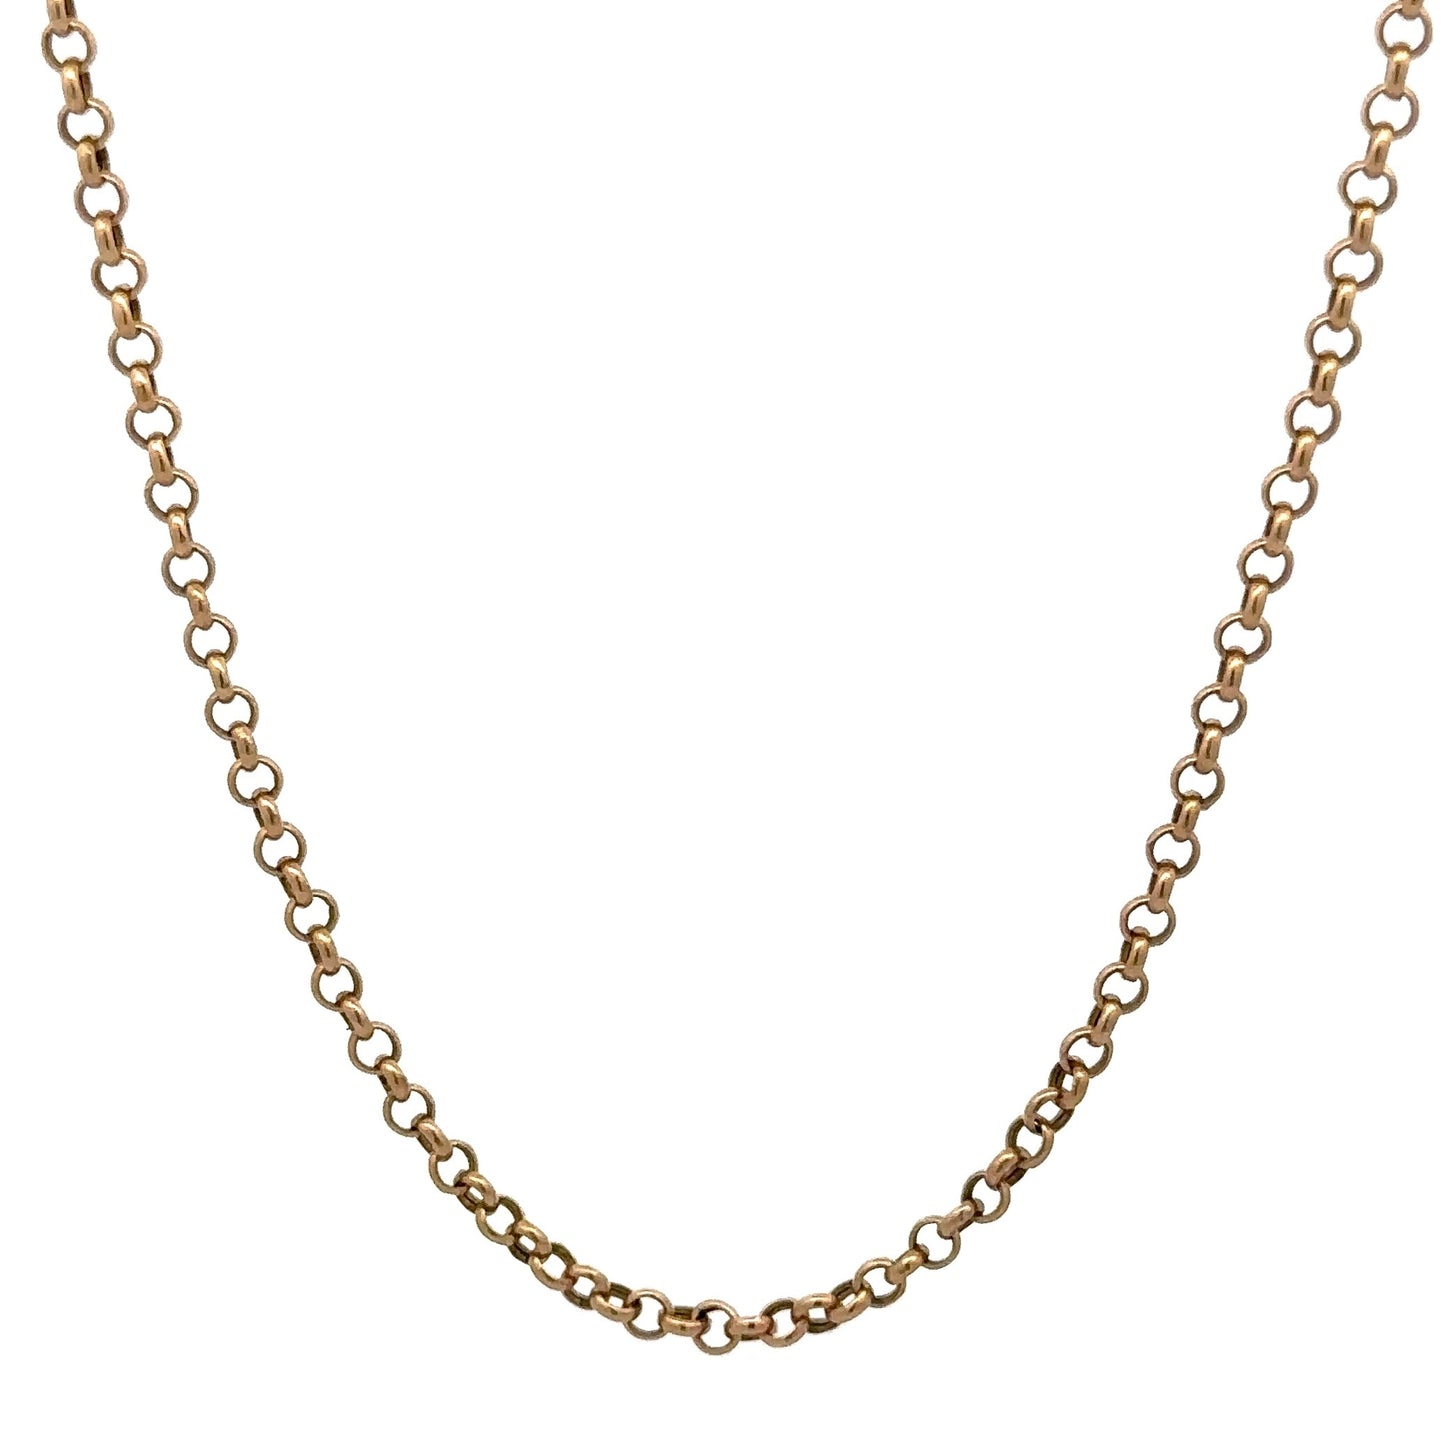 Hanging yellow gold rolo style chain